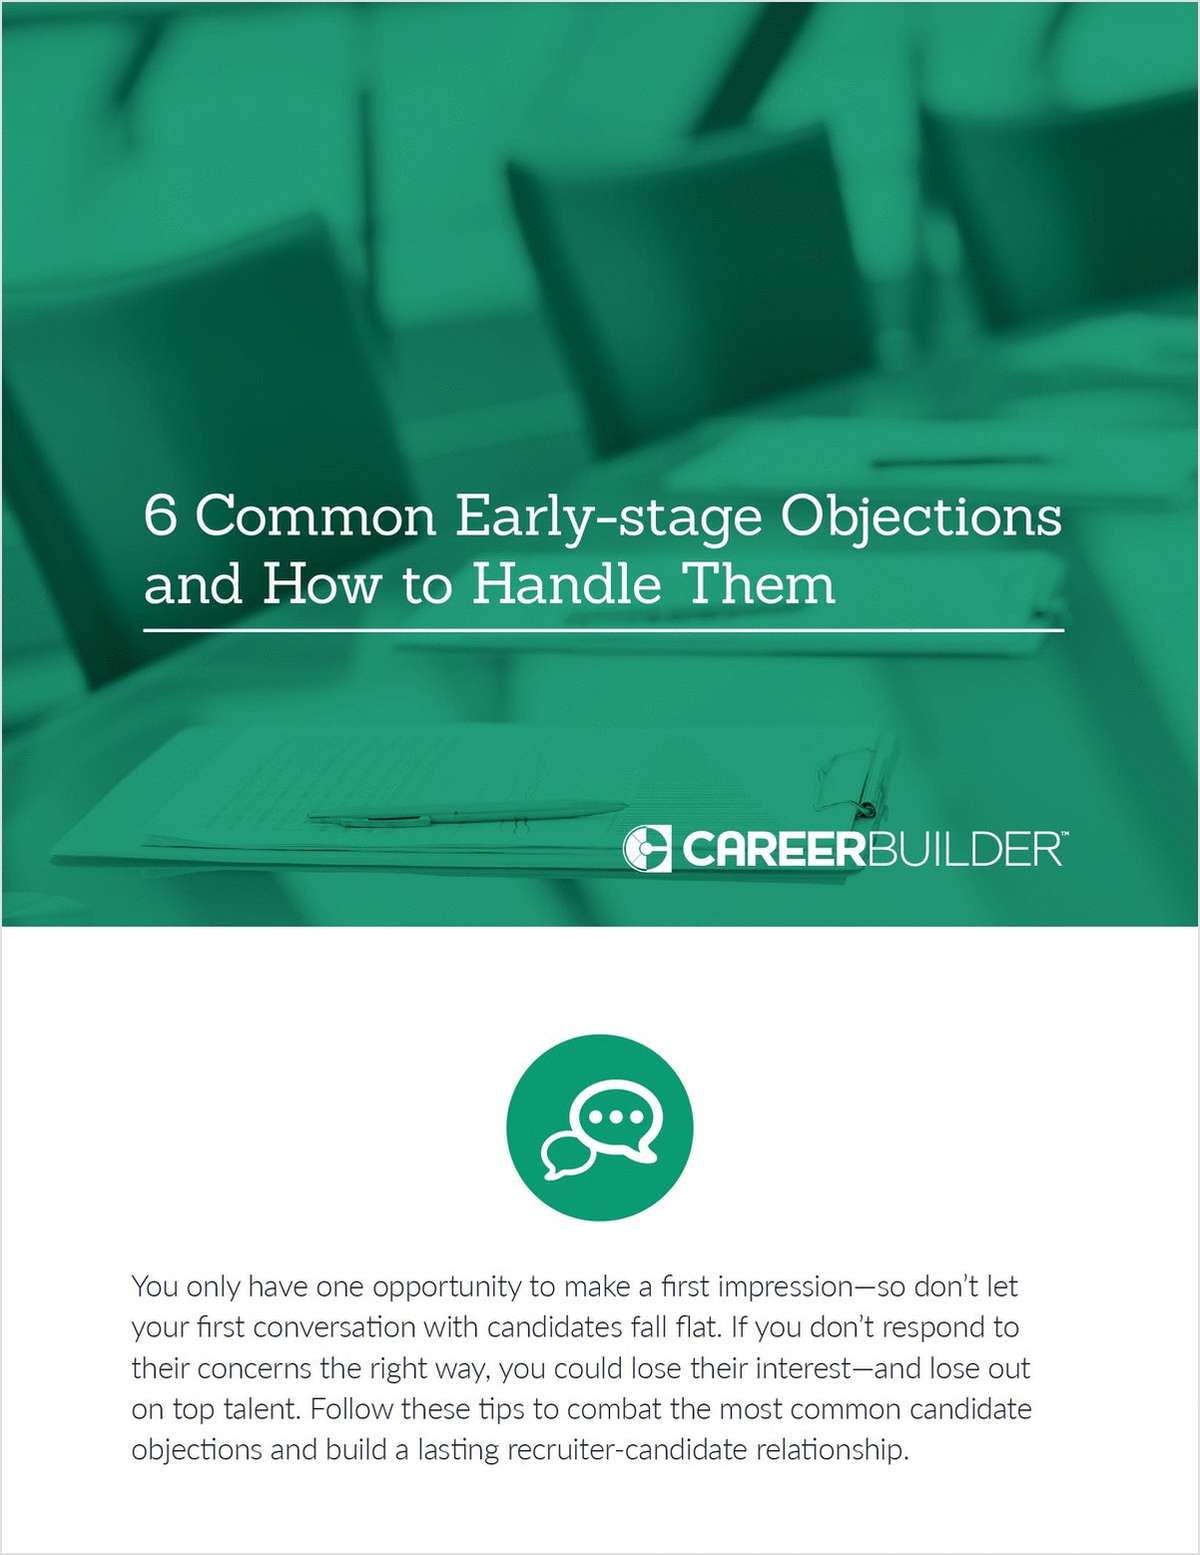 6 Common Early-stage Hiring Objections and How to Handle Them